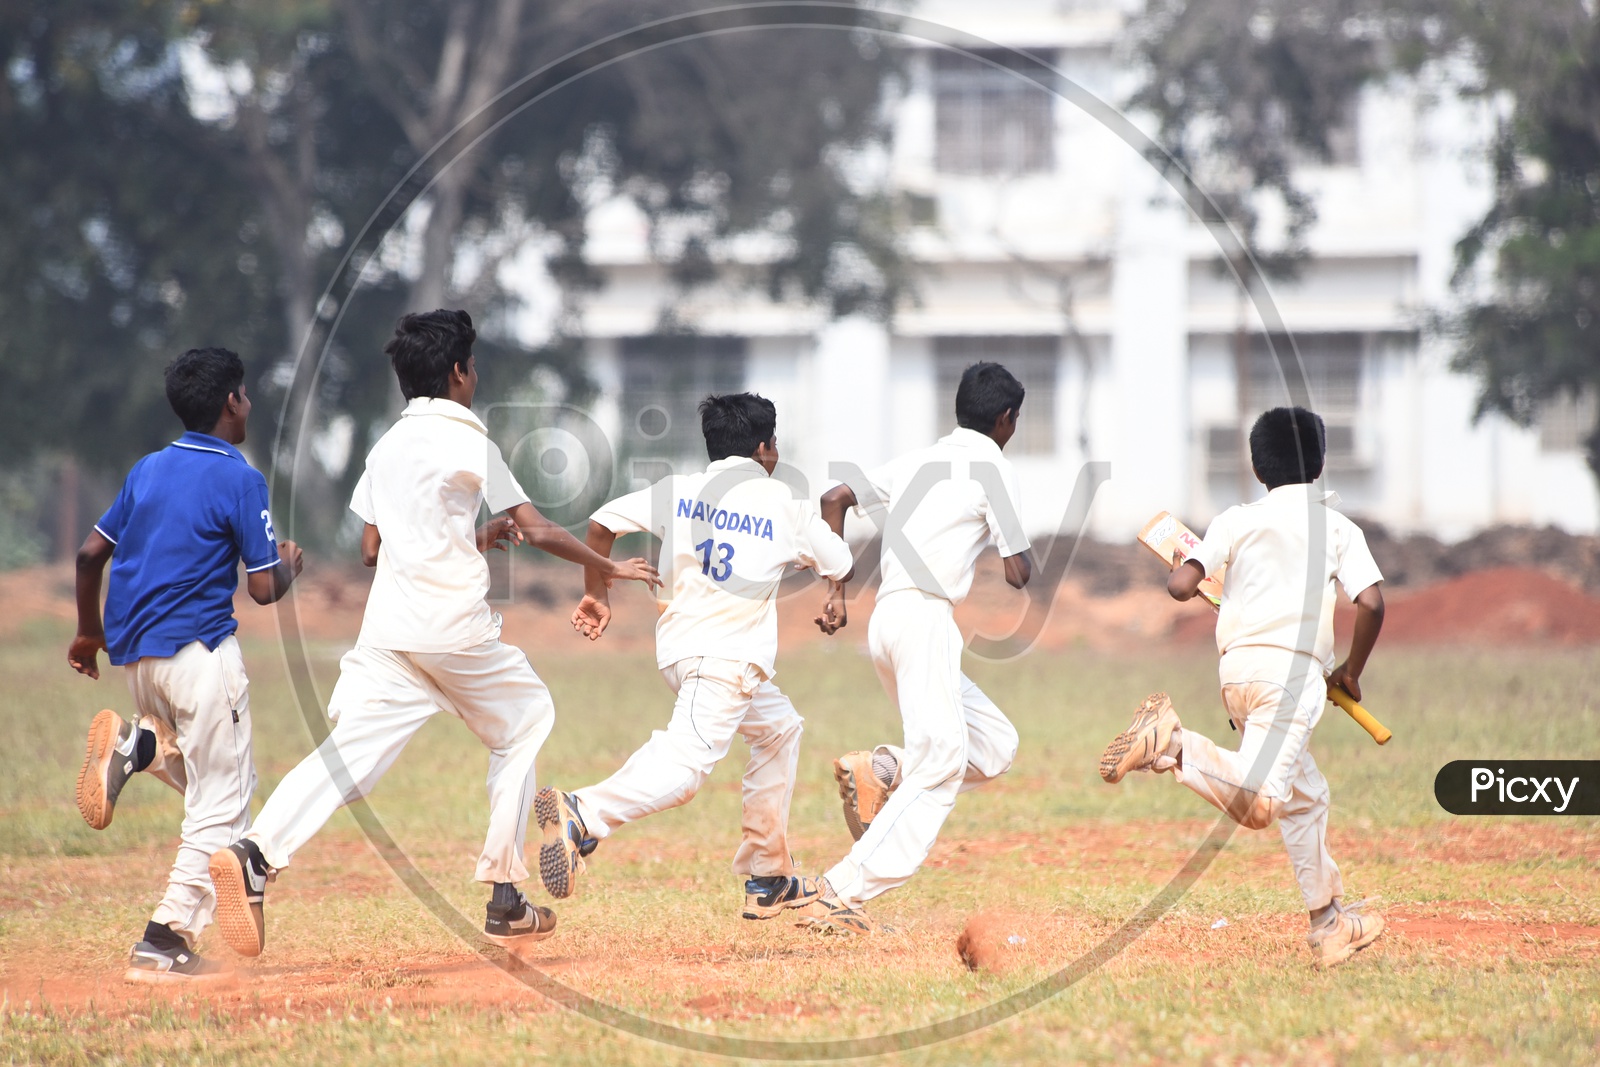 School cricket players running in the ground